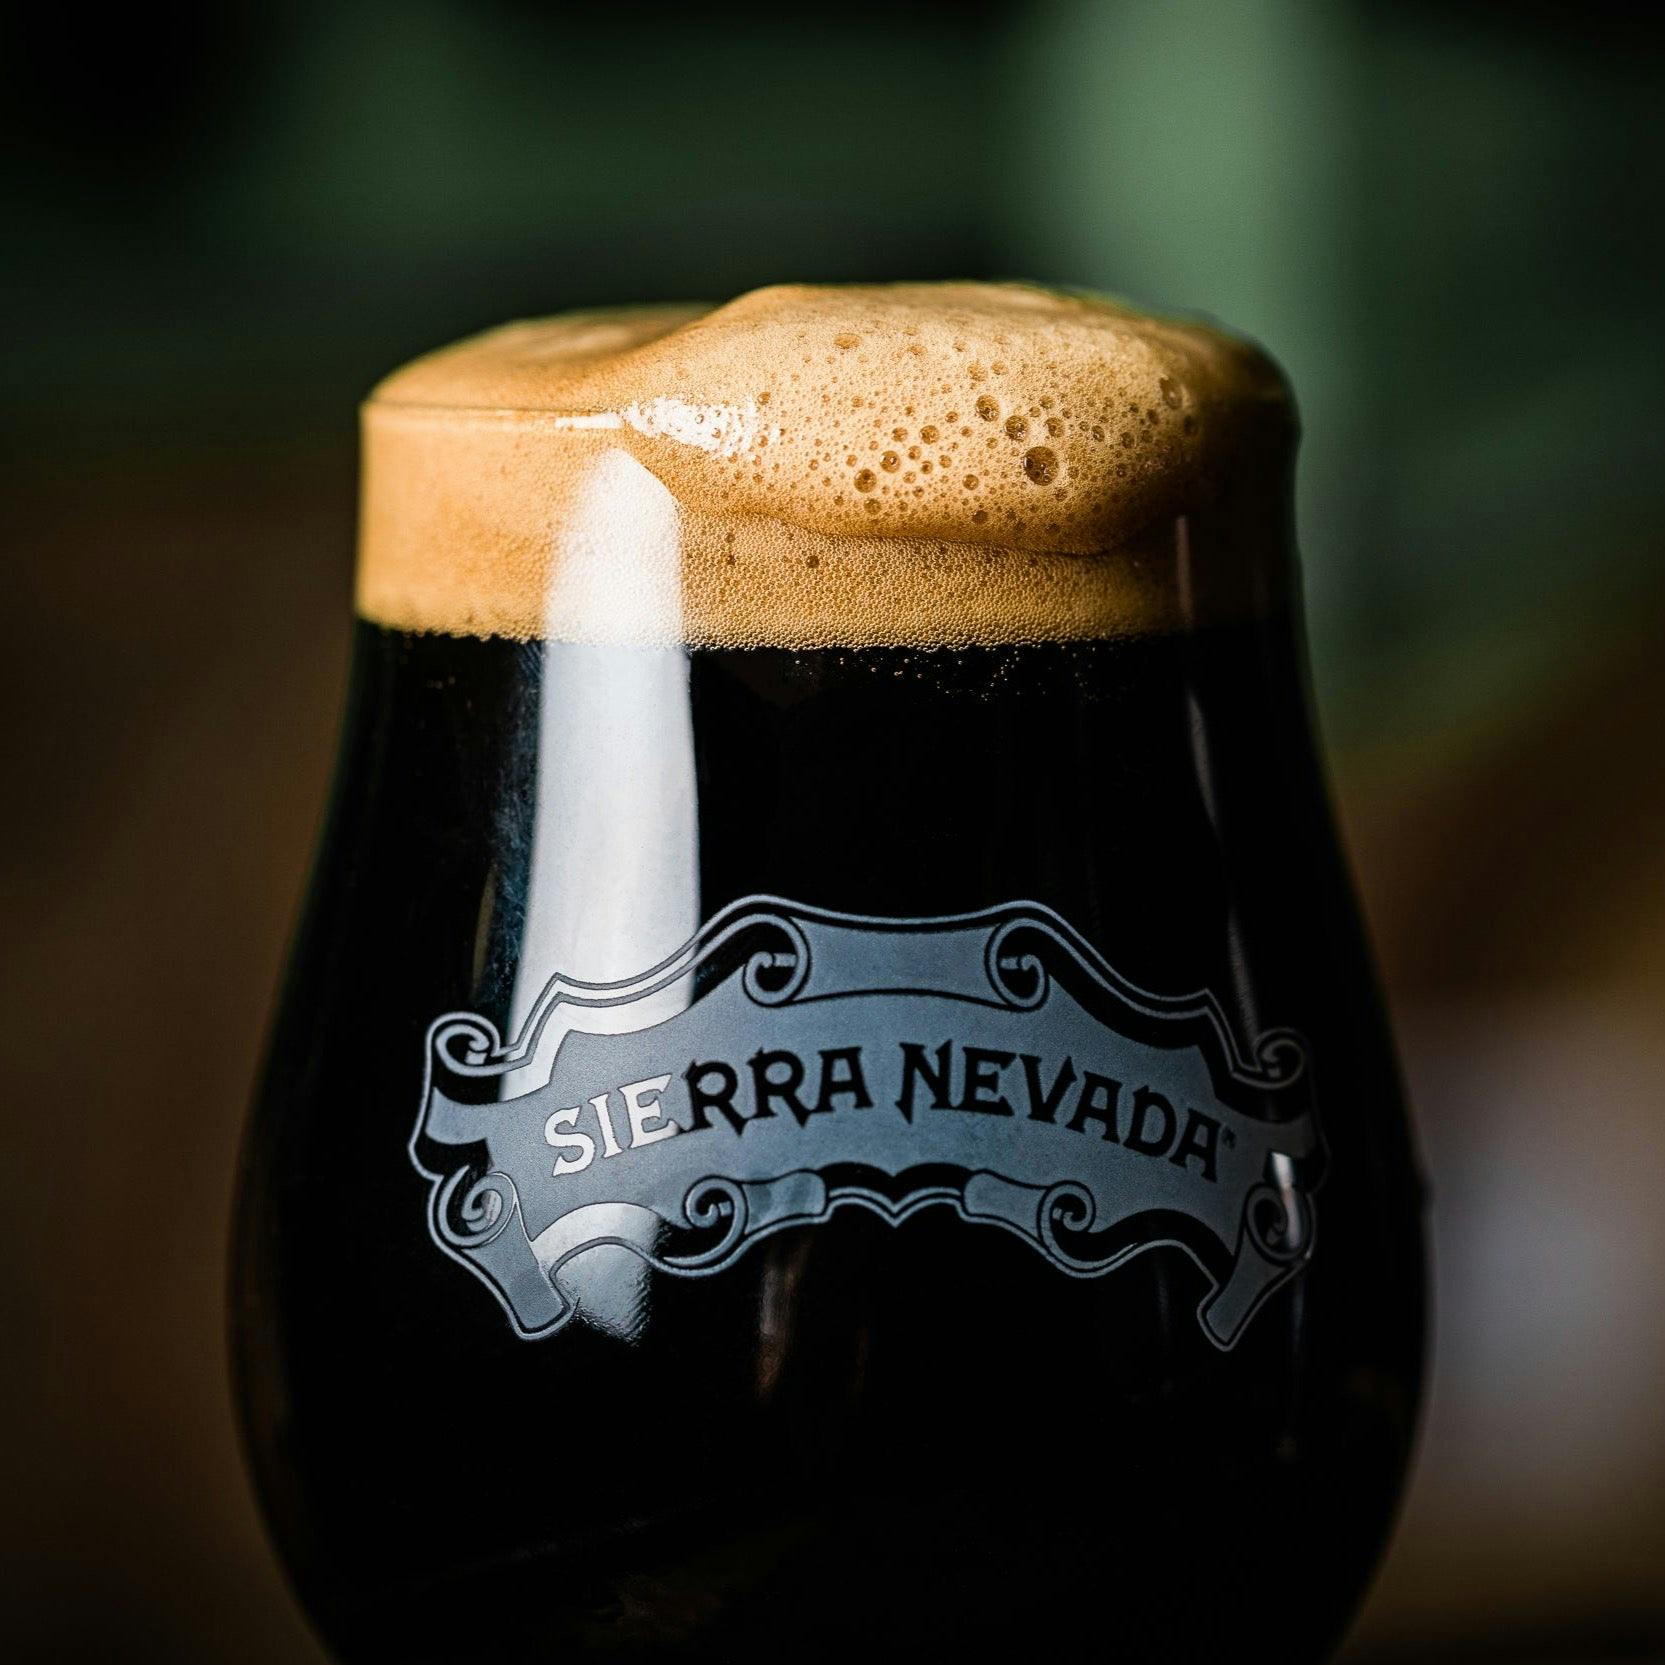 A pint glass of Sierra Nevada Barrel Aged Narwhal Imperial Stout